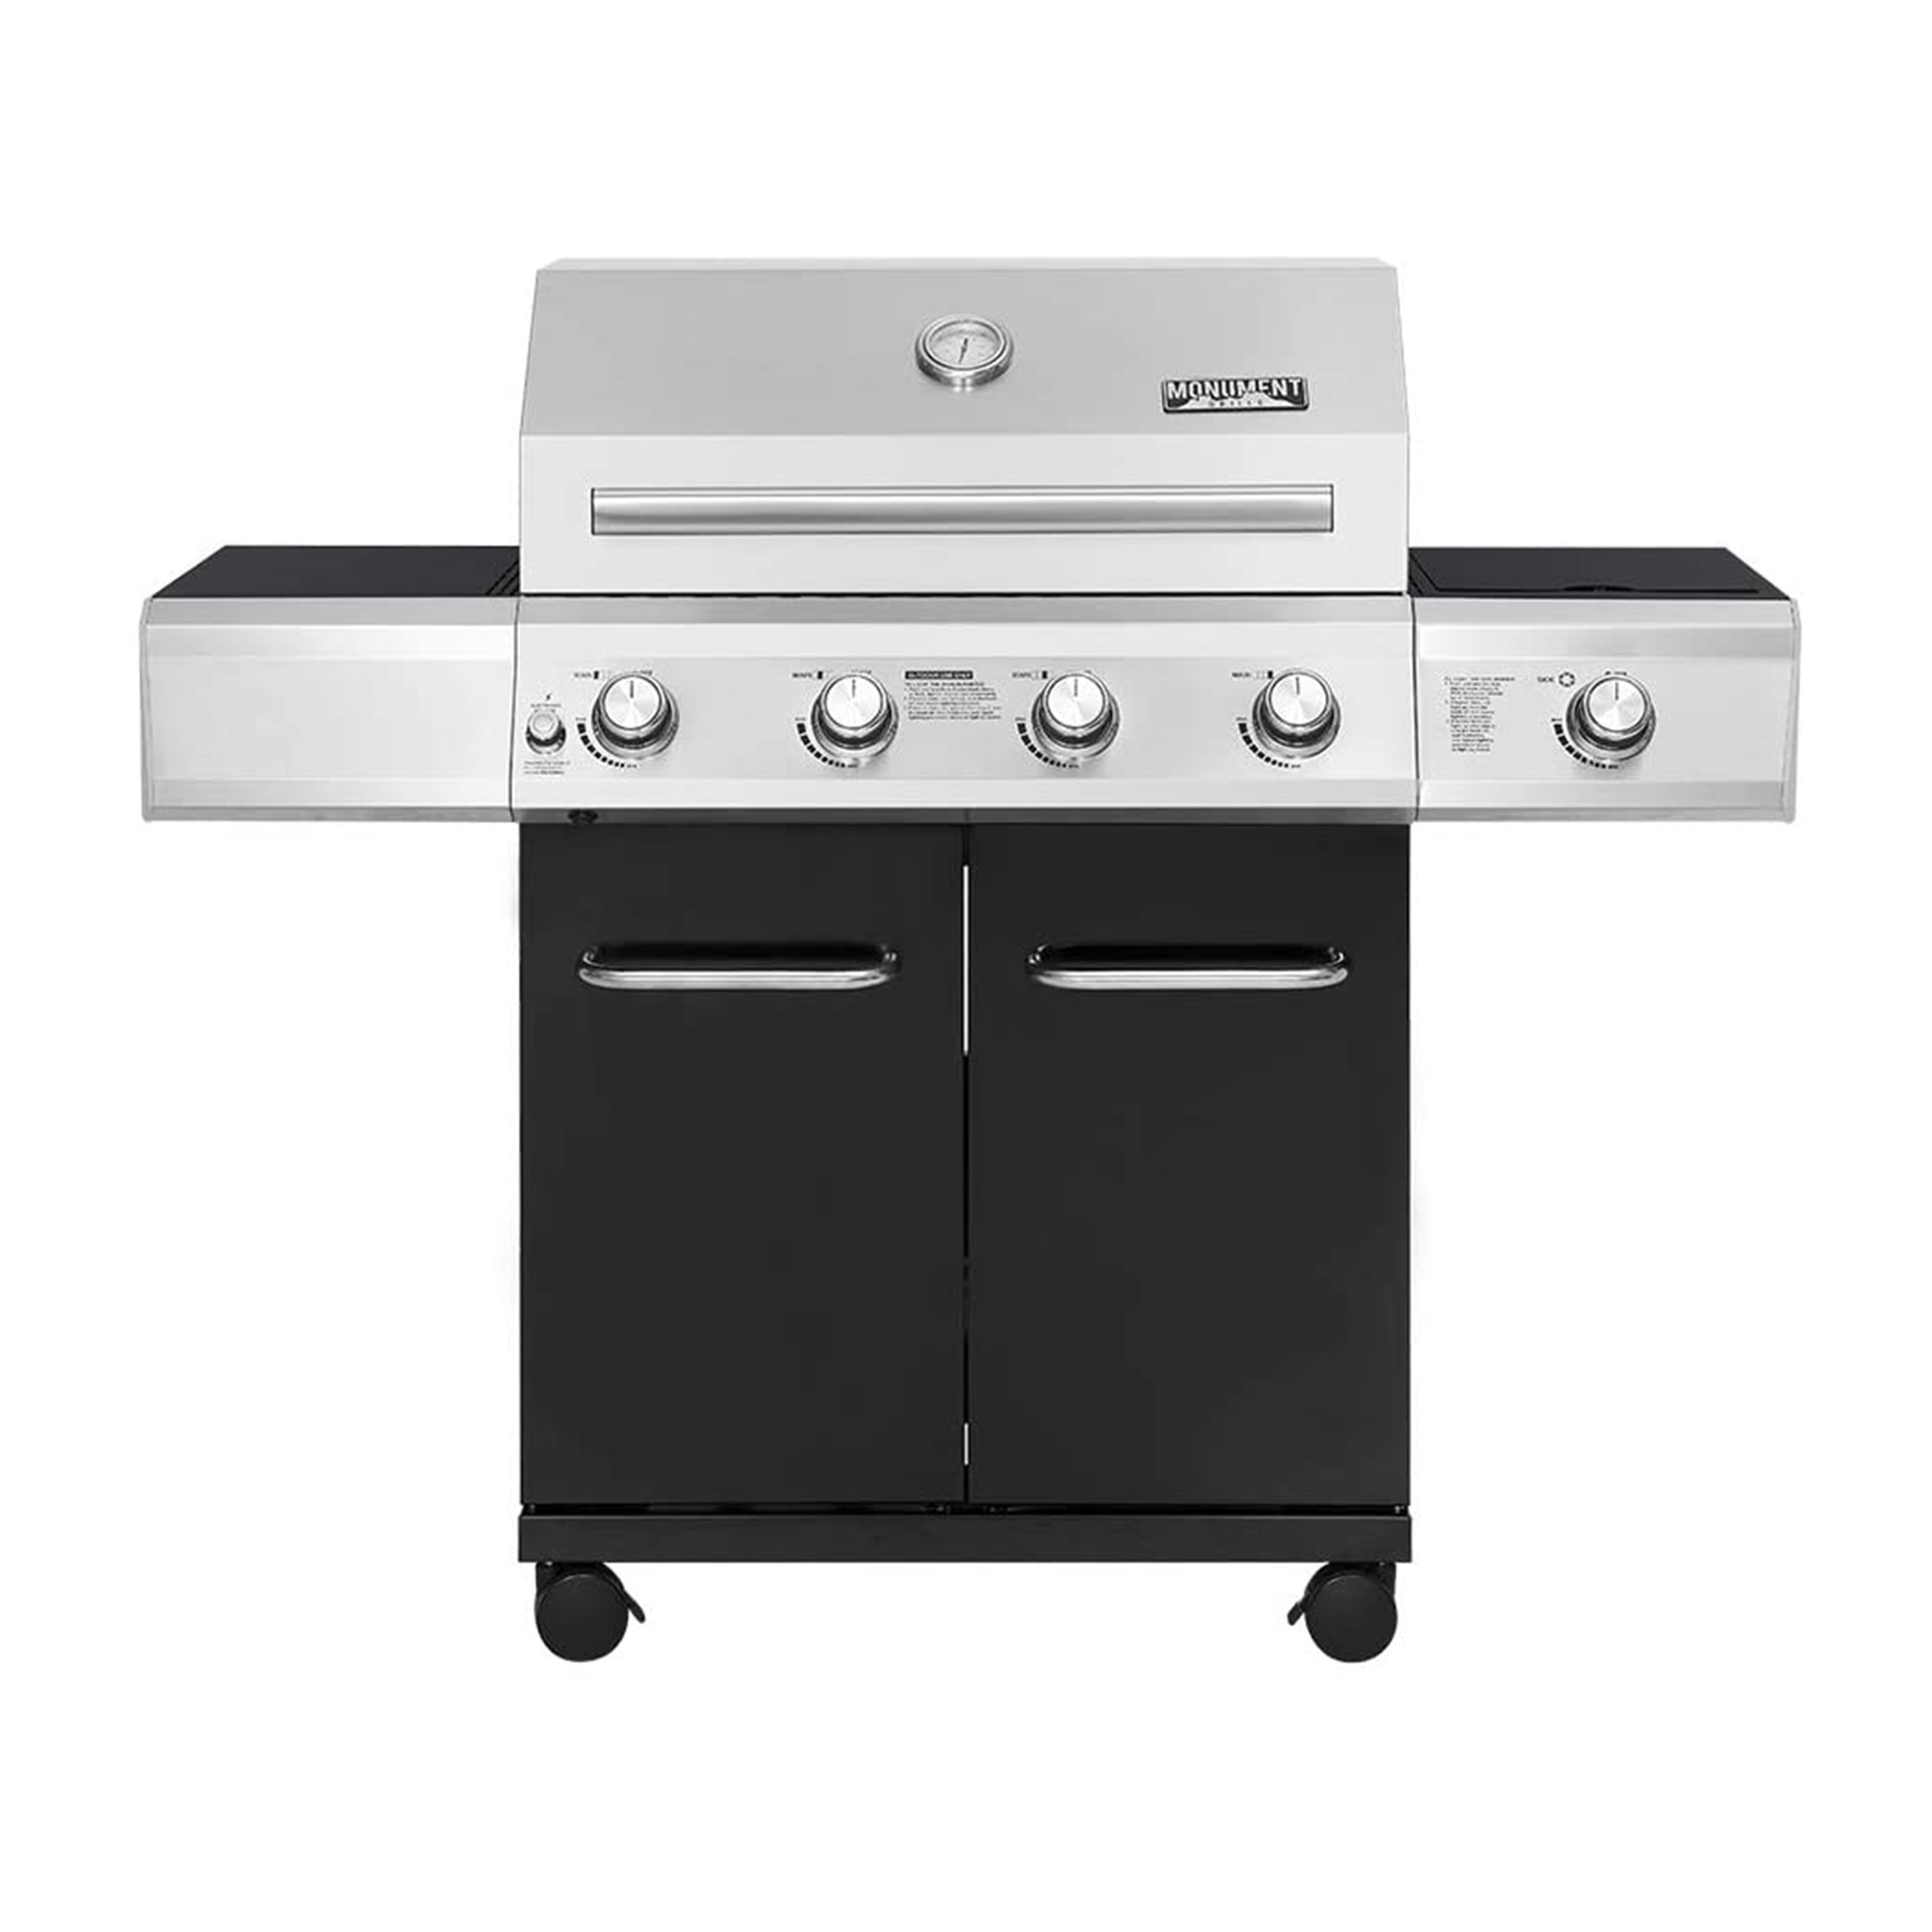 Monument Grills 4 Burner LED Control Stainless Steel Propane Gas Grill - image 2 of 6